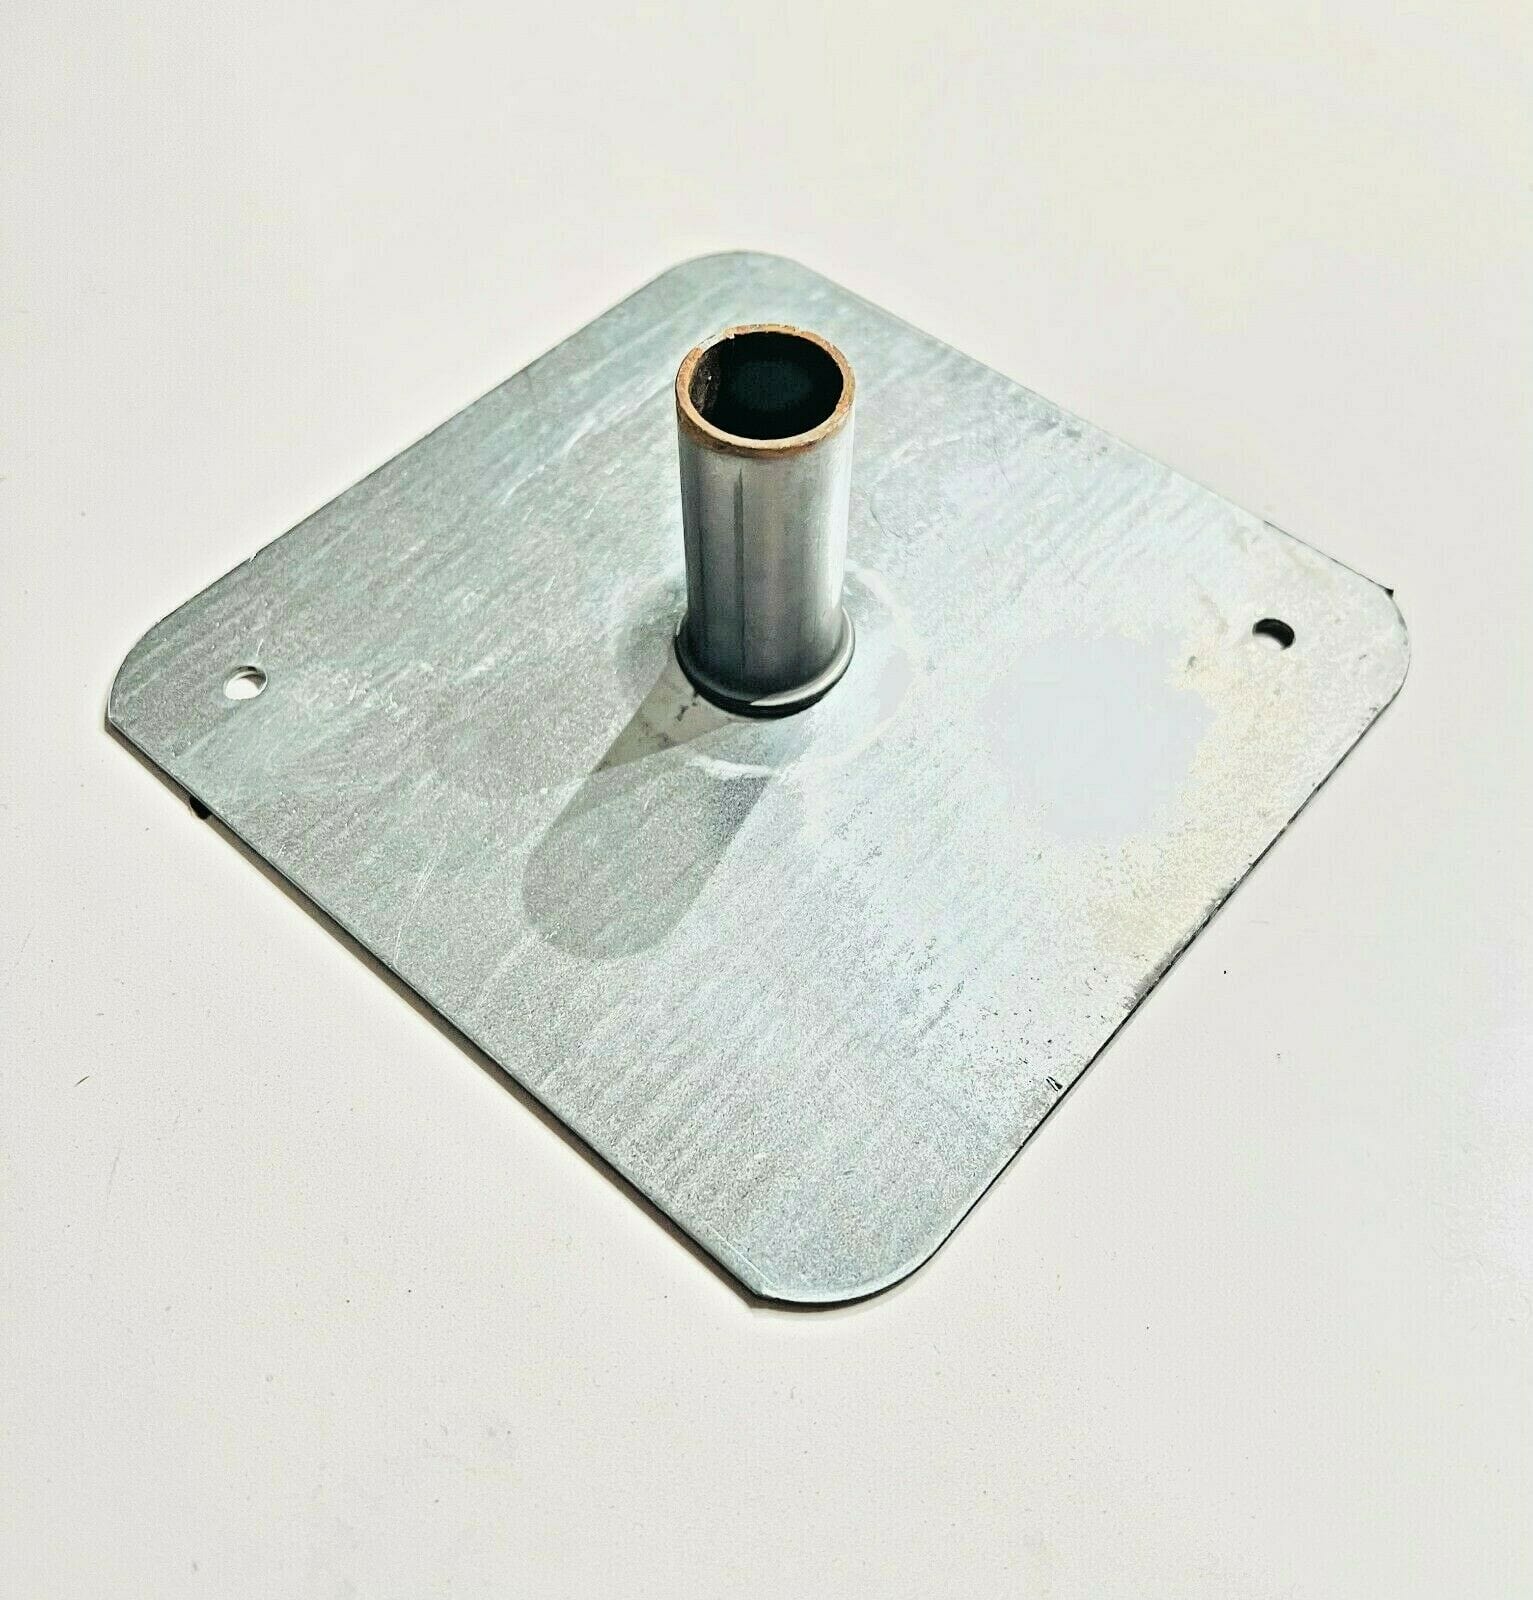 Scaffolding Base Plate For Scaffold Tower 150 X 150Mm Zinc Plated Stee